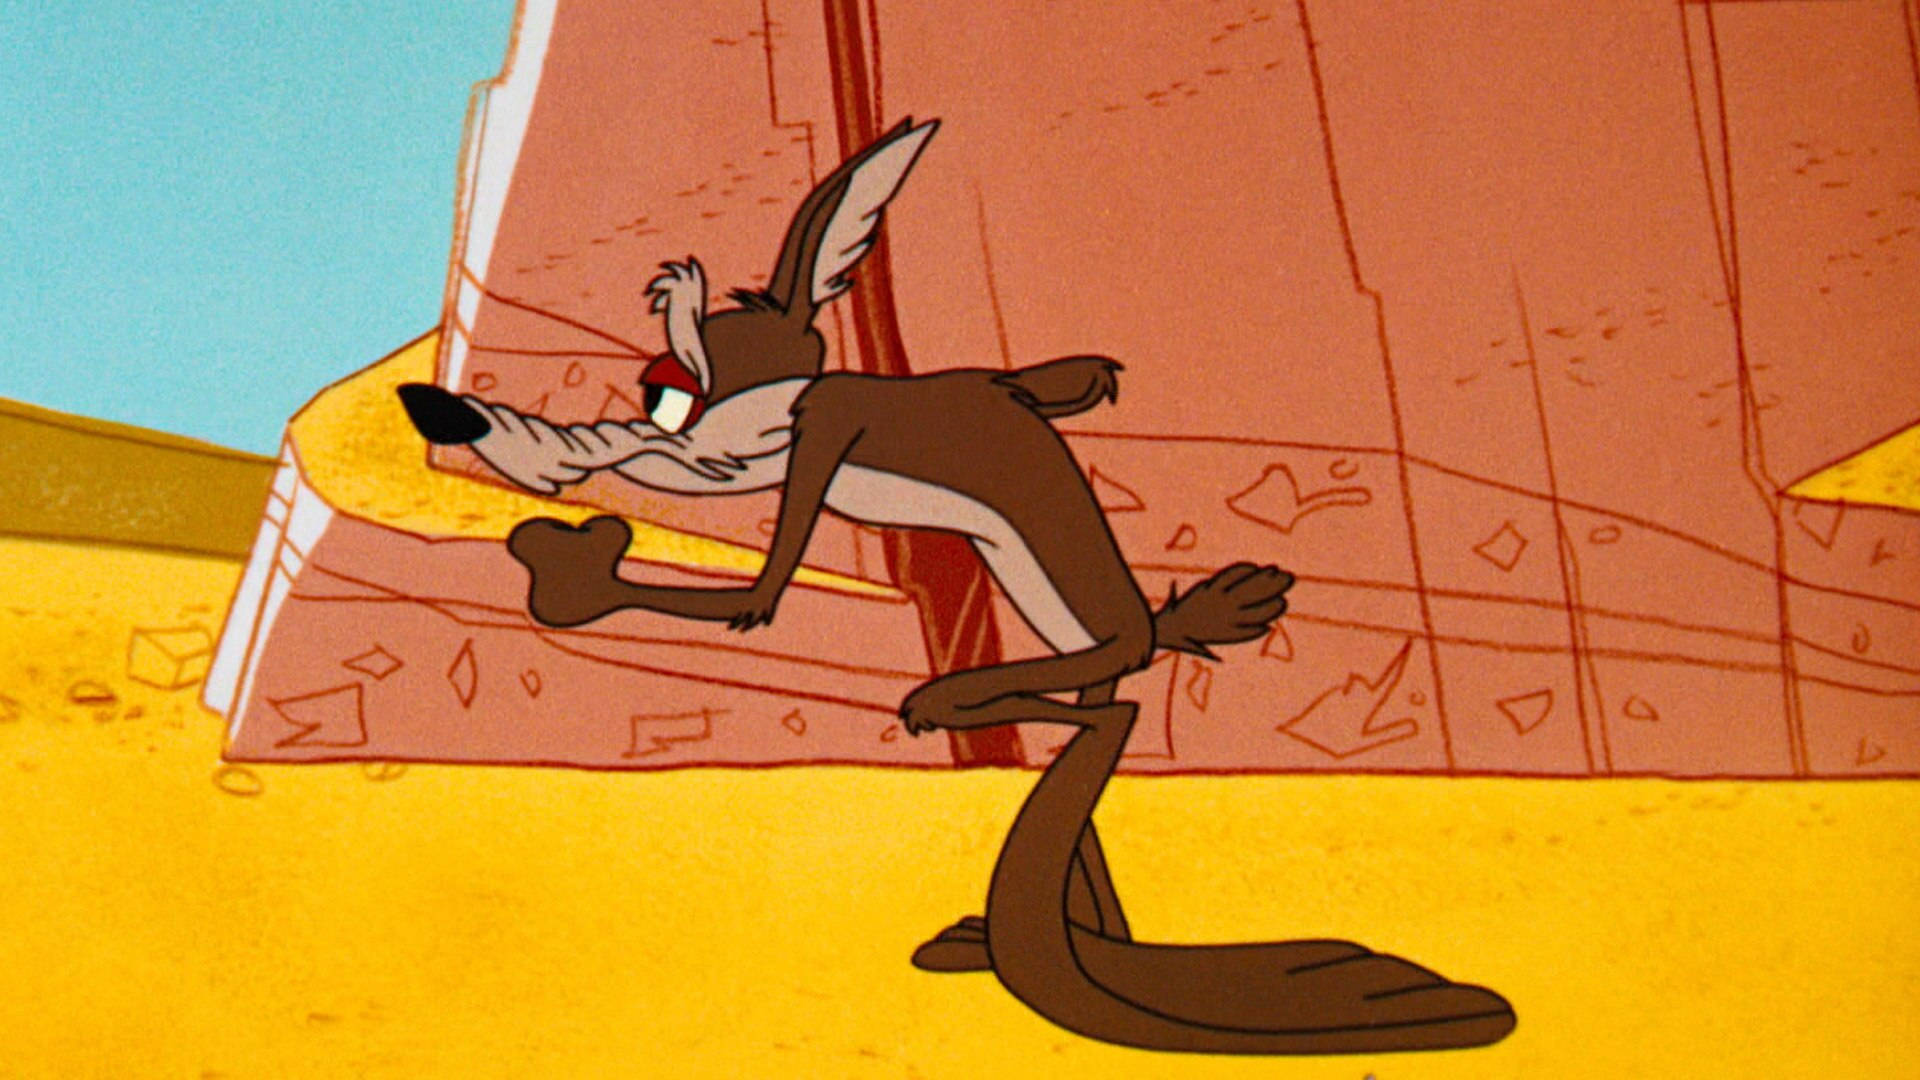 Wile E. Coyote Exhausted After Numerous Failed Attempts. Wallpaper